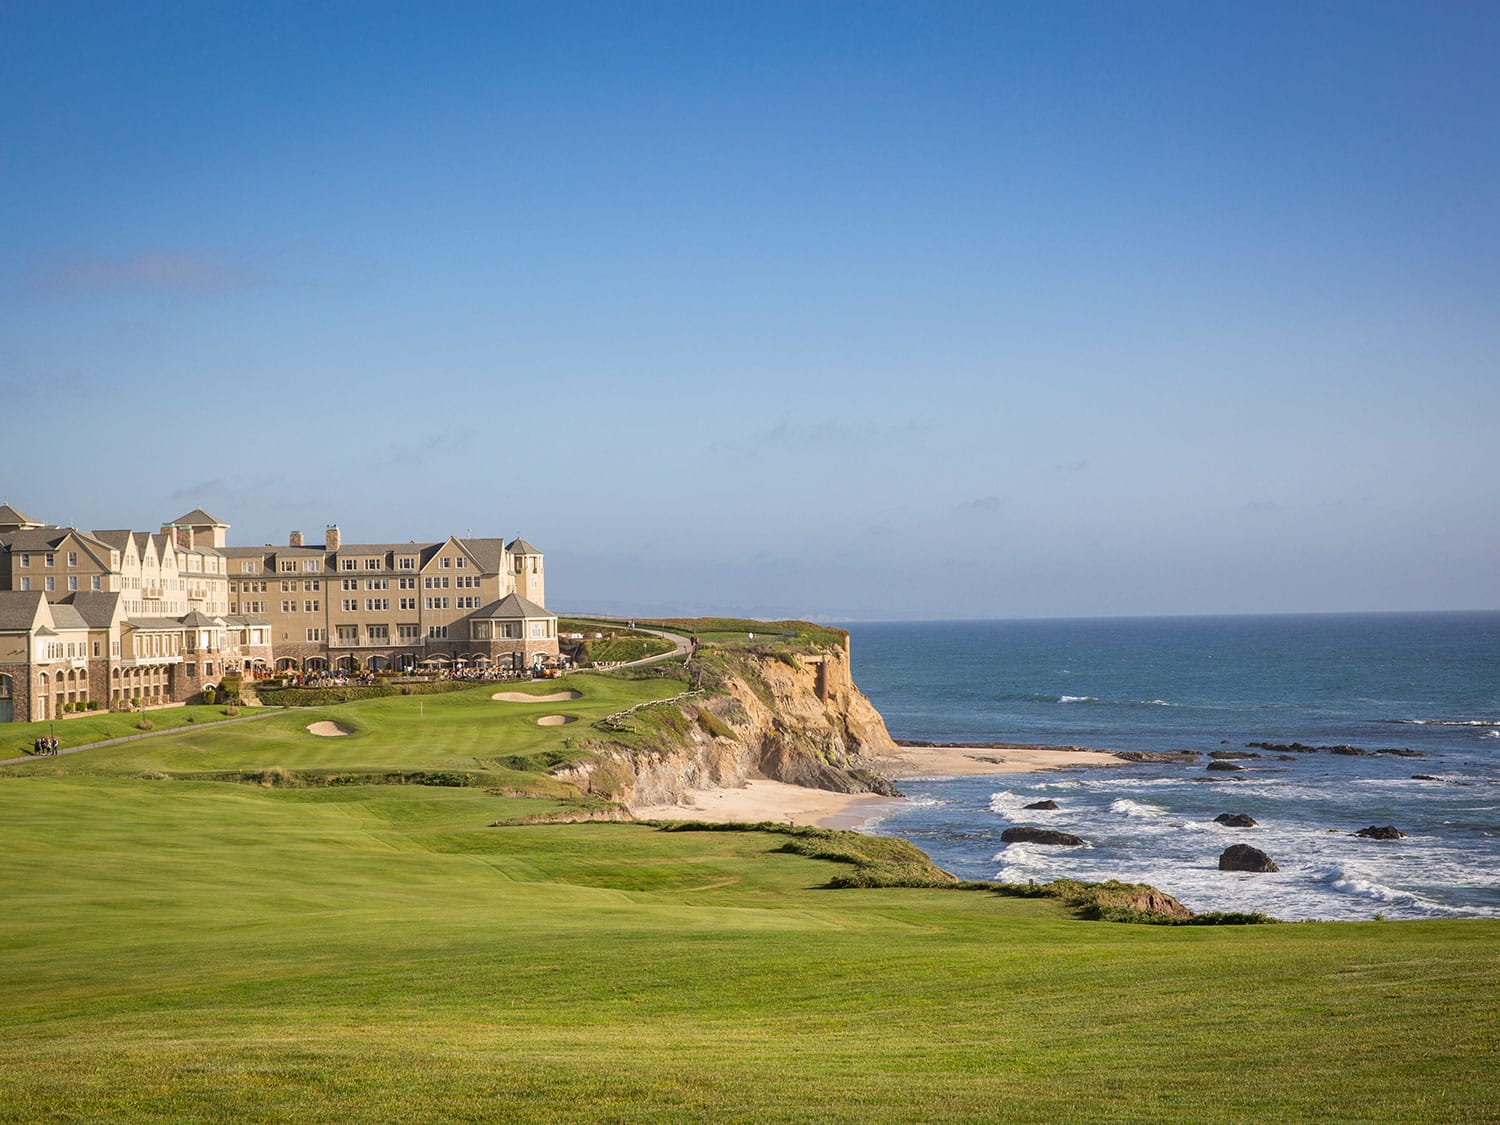 The 18th hole of the Ocean Course at The Ritz-Carlton Half Moon Bay resort in California.